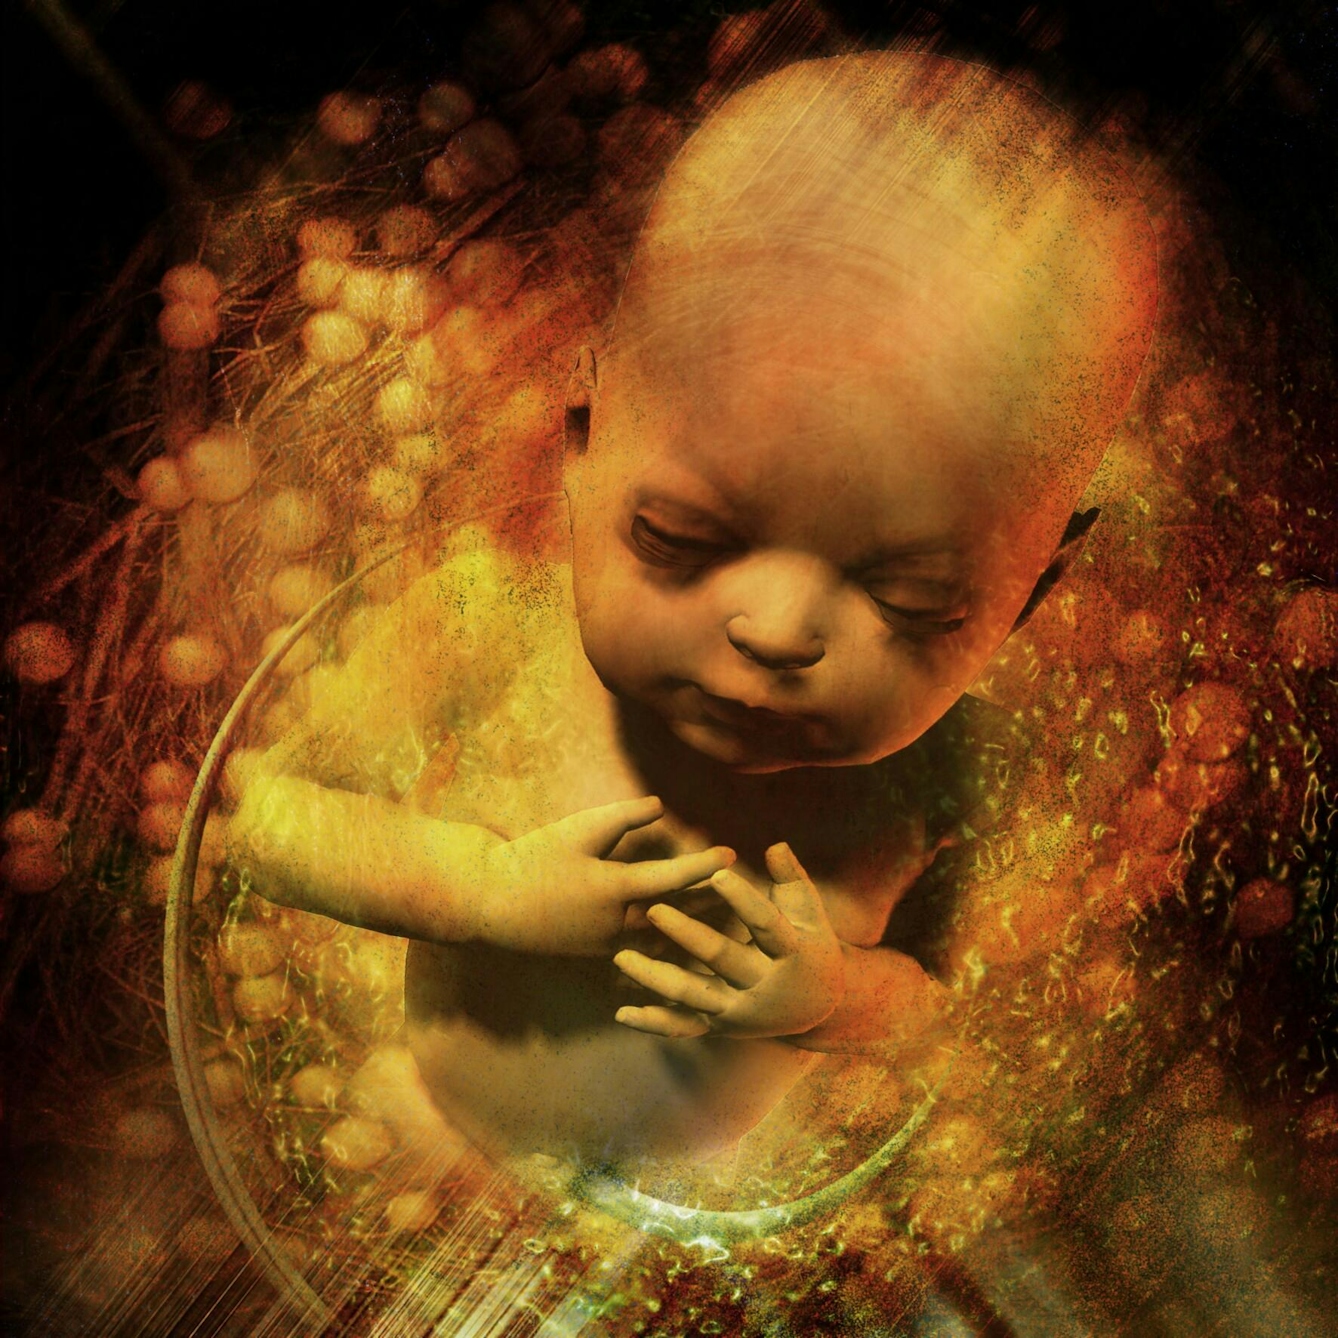 Colour illustration of a baby in the womb. The head, shoulders and chest of the baby is visible, and it is surrounded by swirling abstract patterns. The baby has its eyes closed and its arms crossed in front of it, with its hands resting lightly on its chest. 